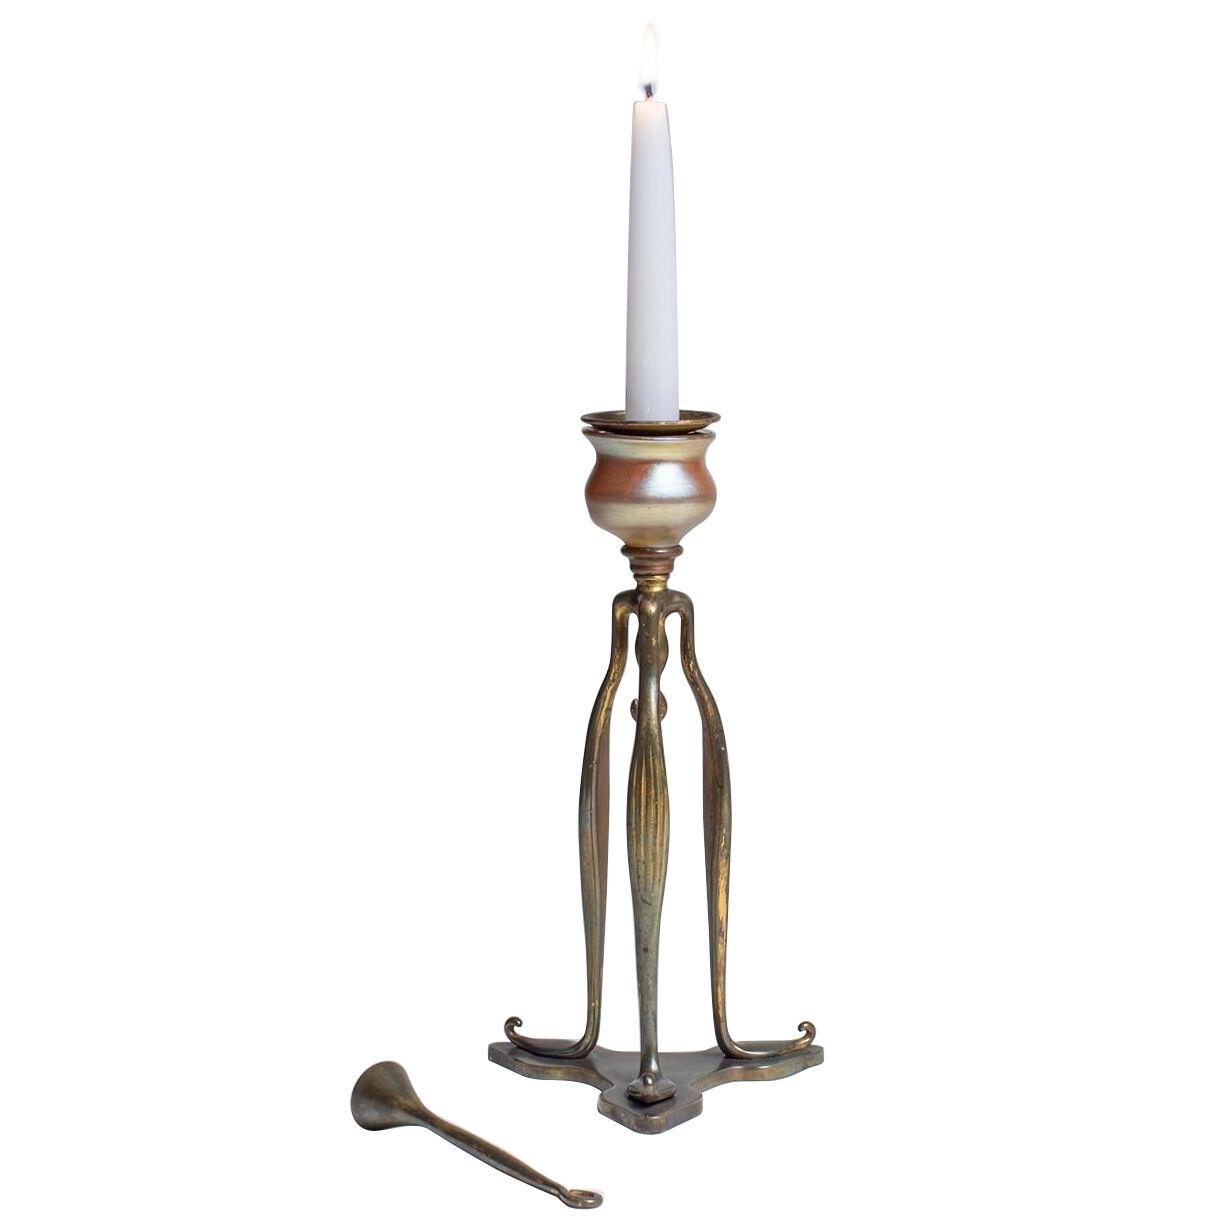 Candlestick with Favrile Glass Candle Cup